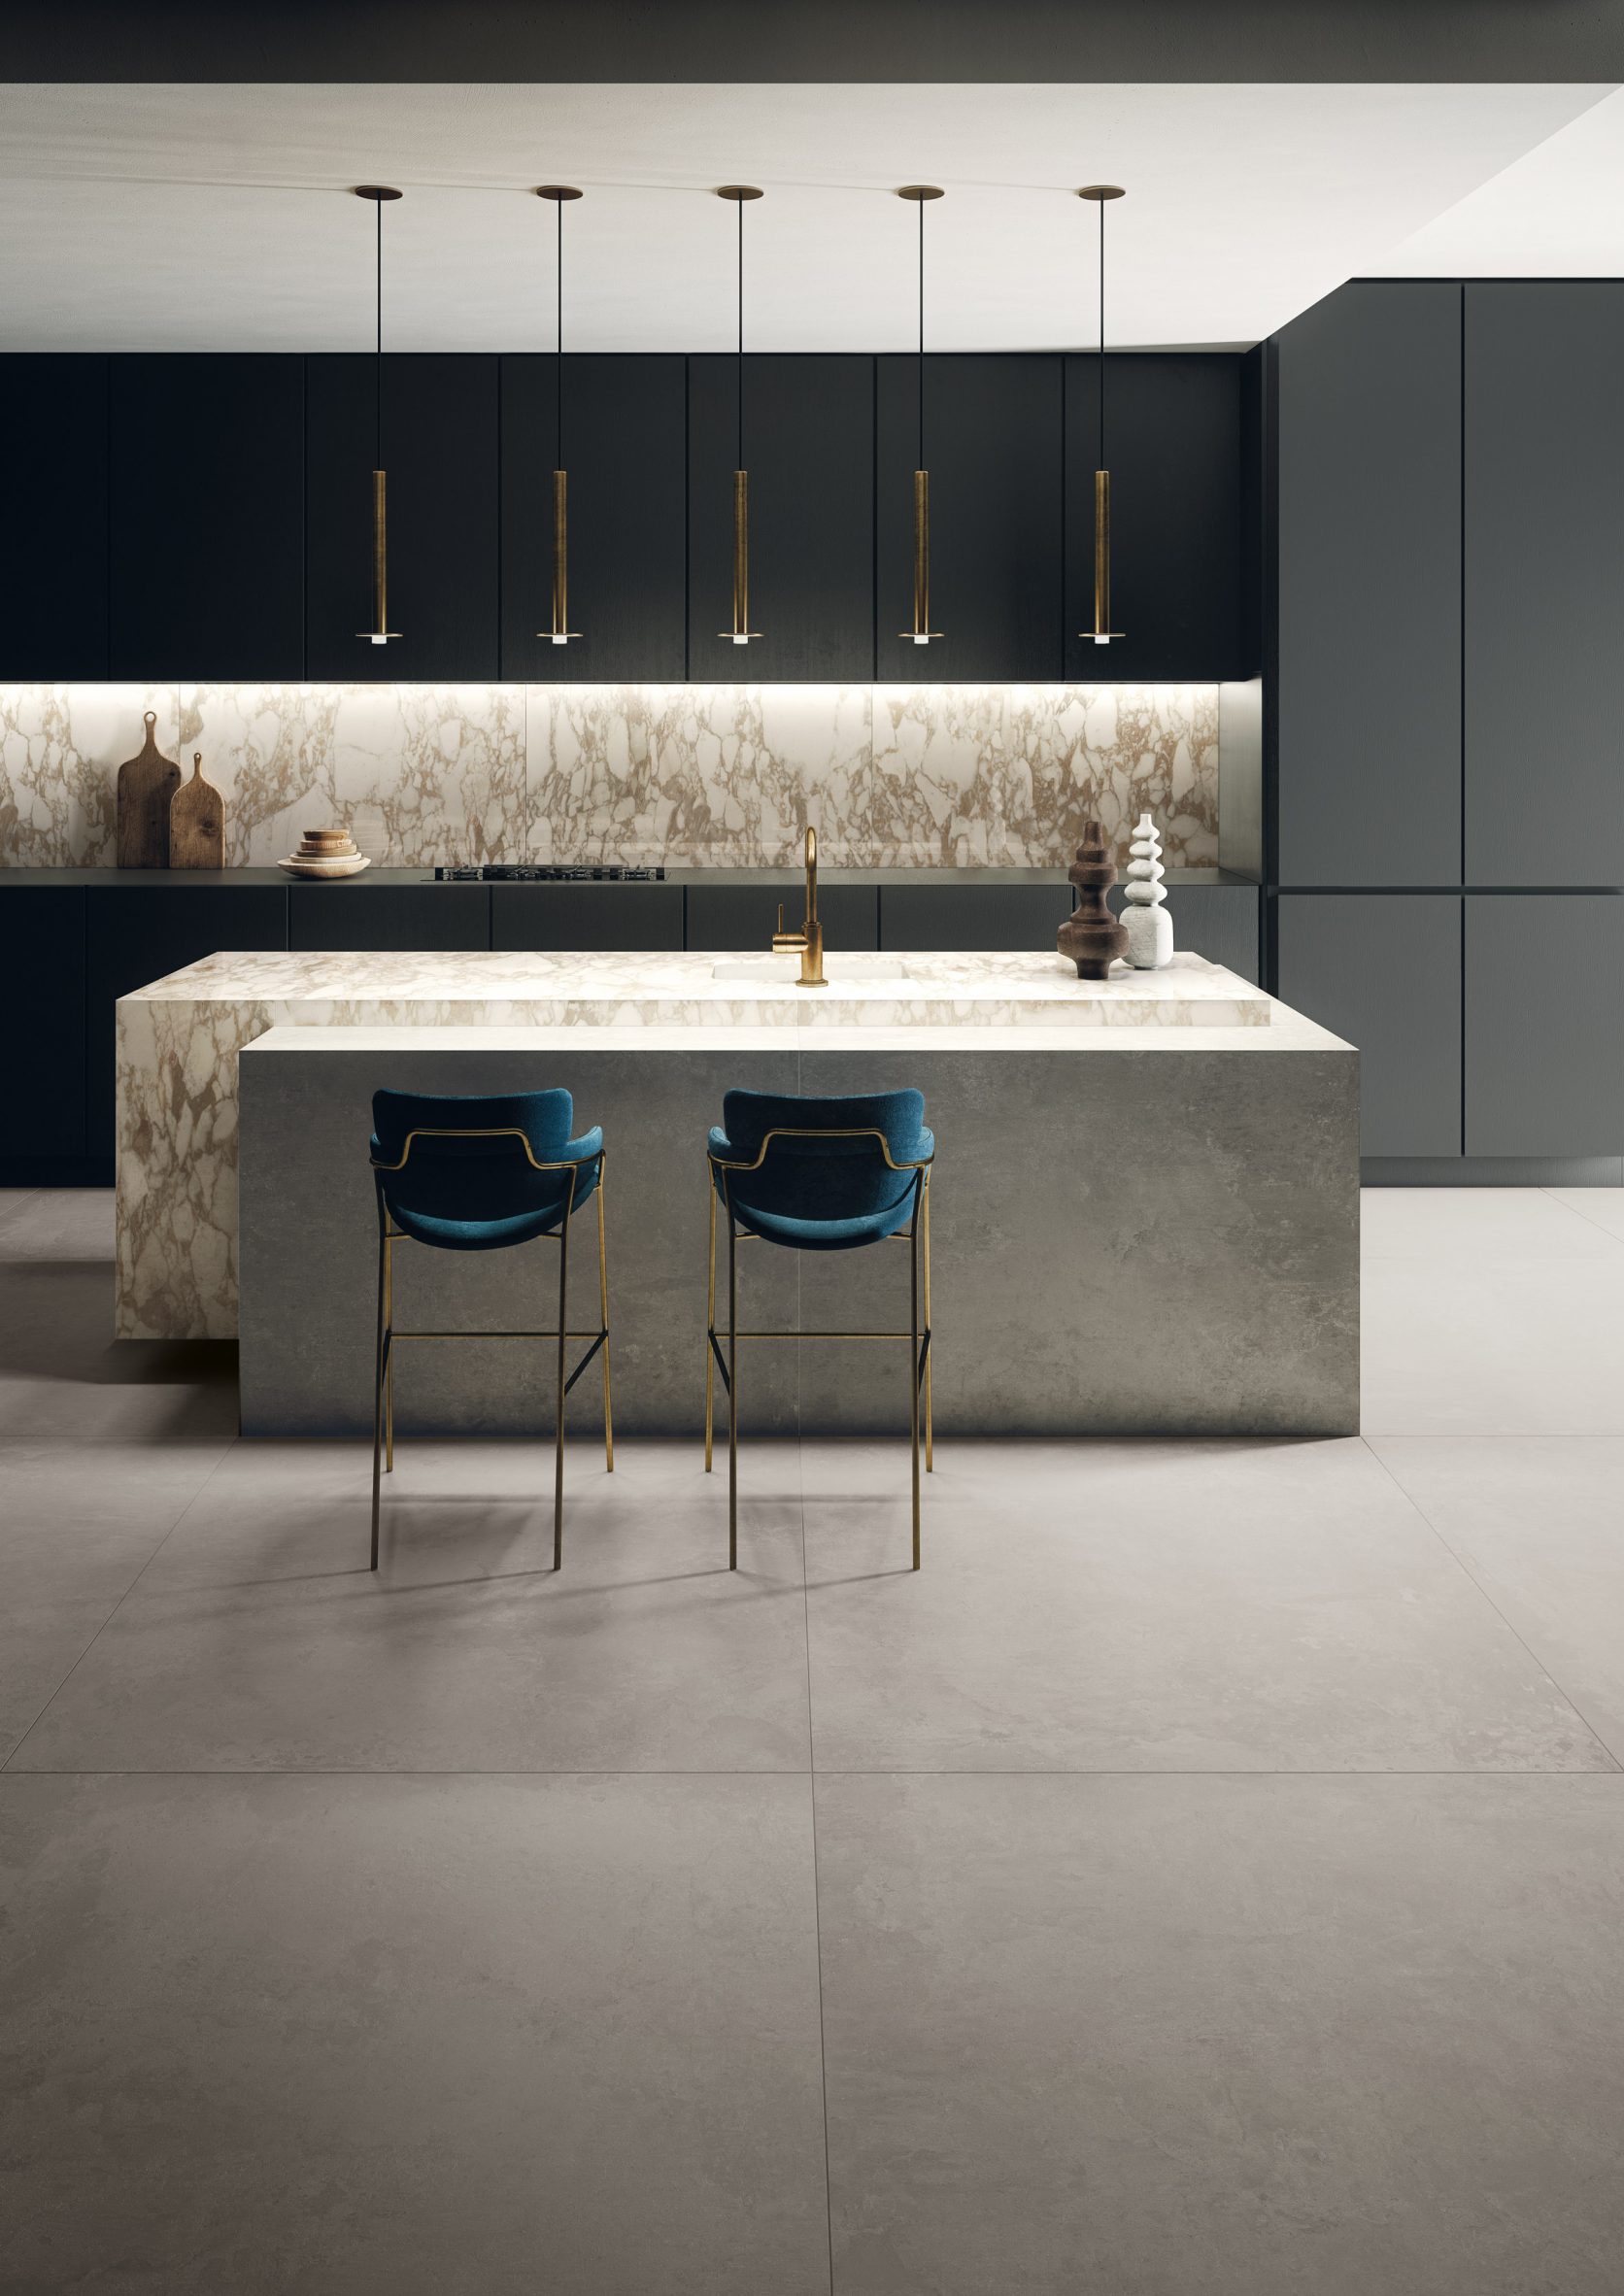 A photograph of Ceramiche Keope's Ikon tiles used in a kitchen